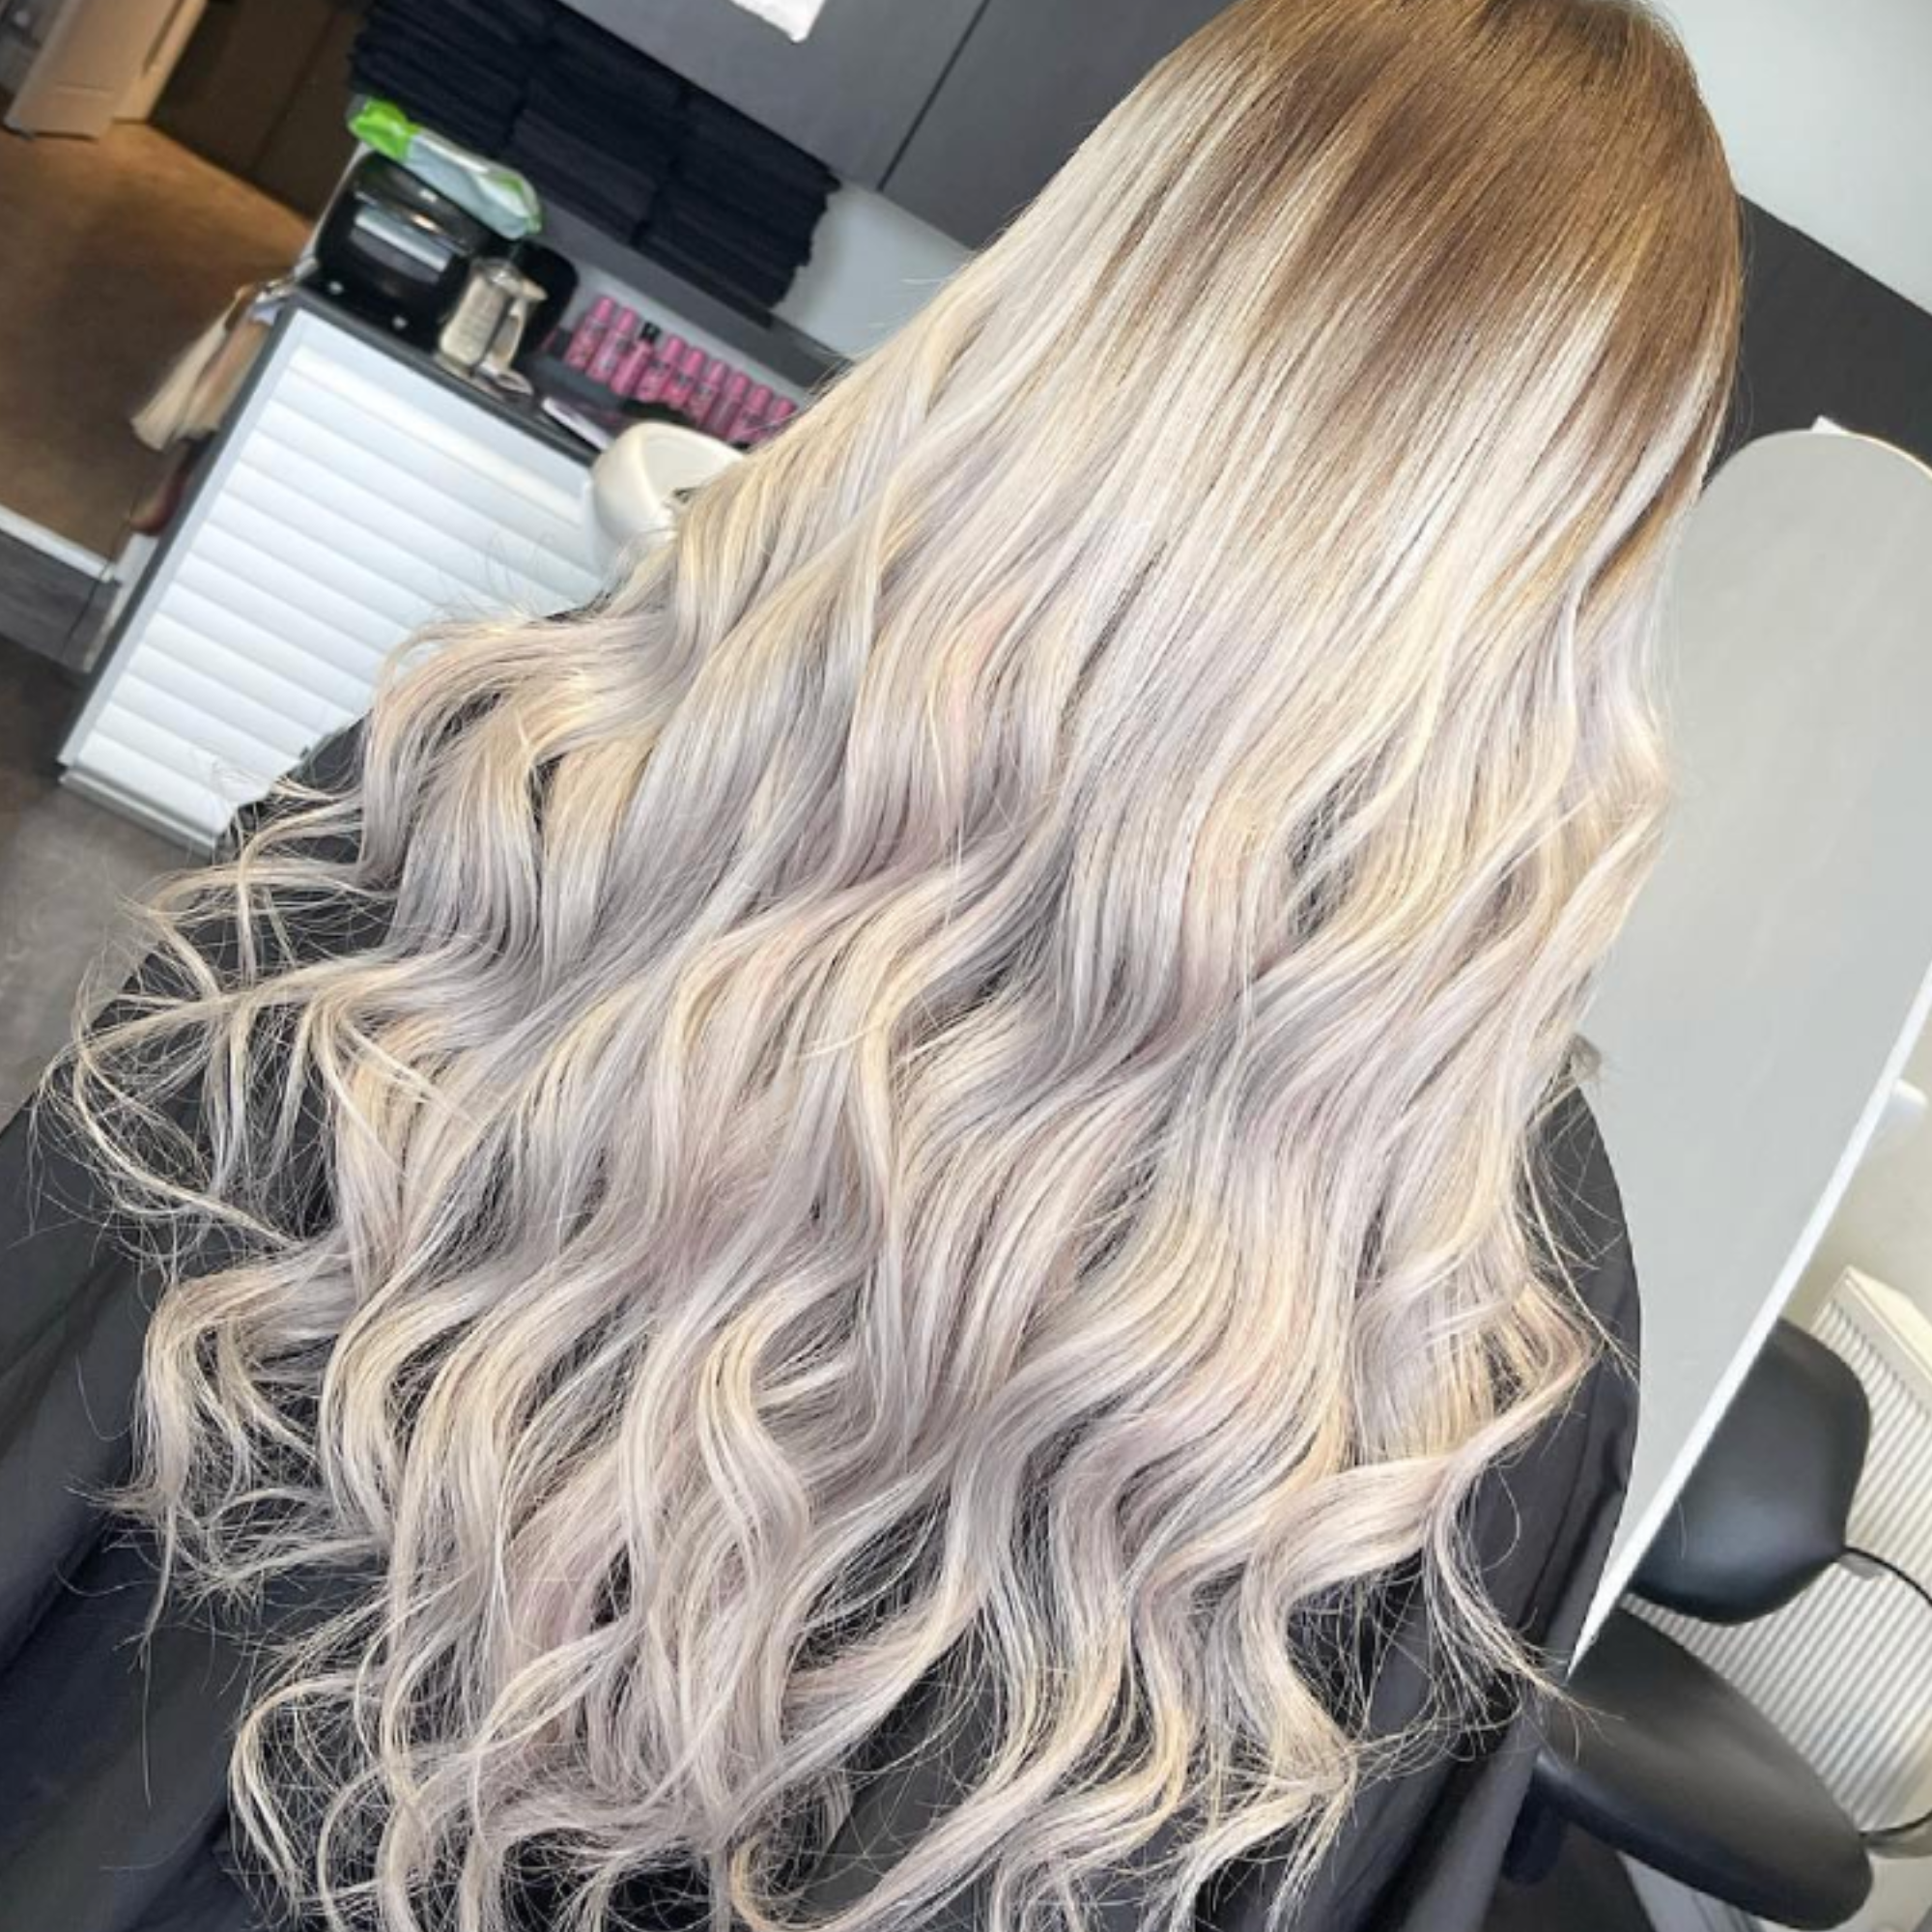 "hair rehab london 14" weft hair extensions shade swatch titled rooted blonde af"